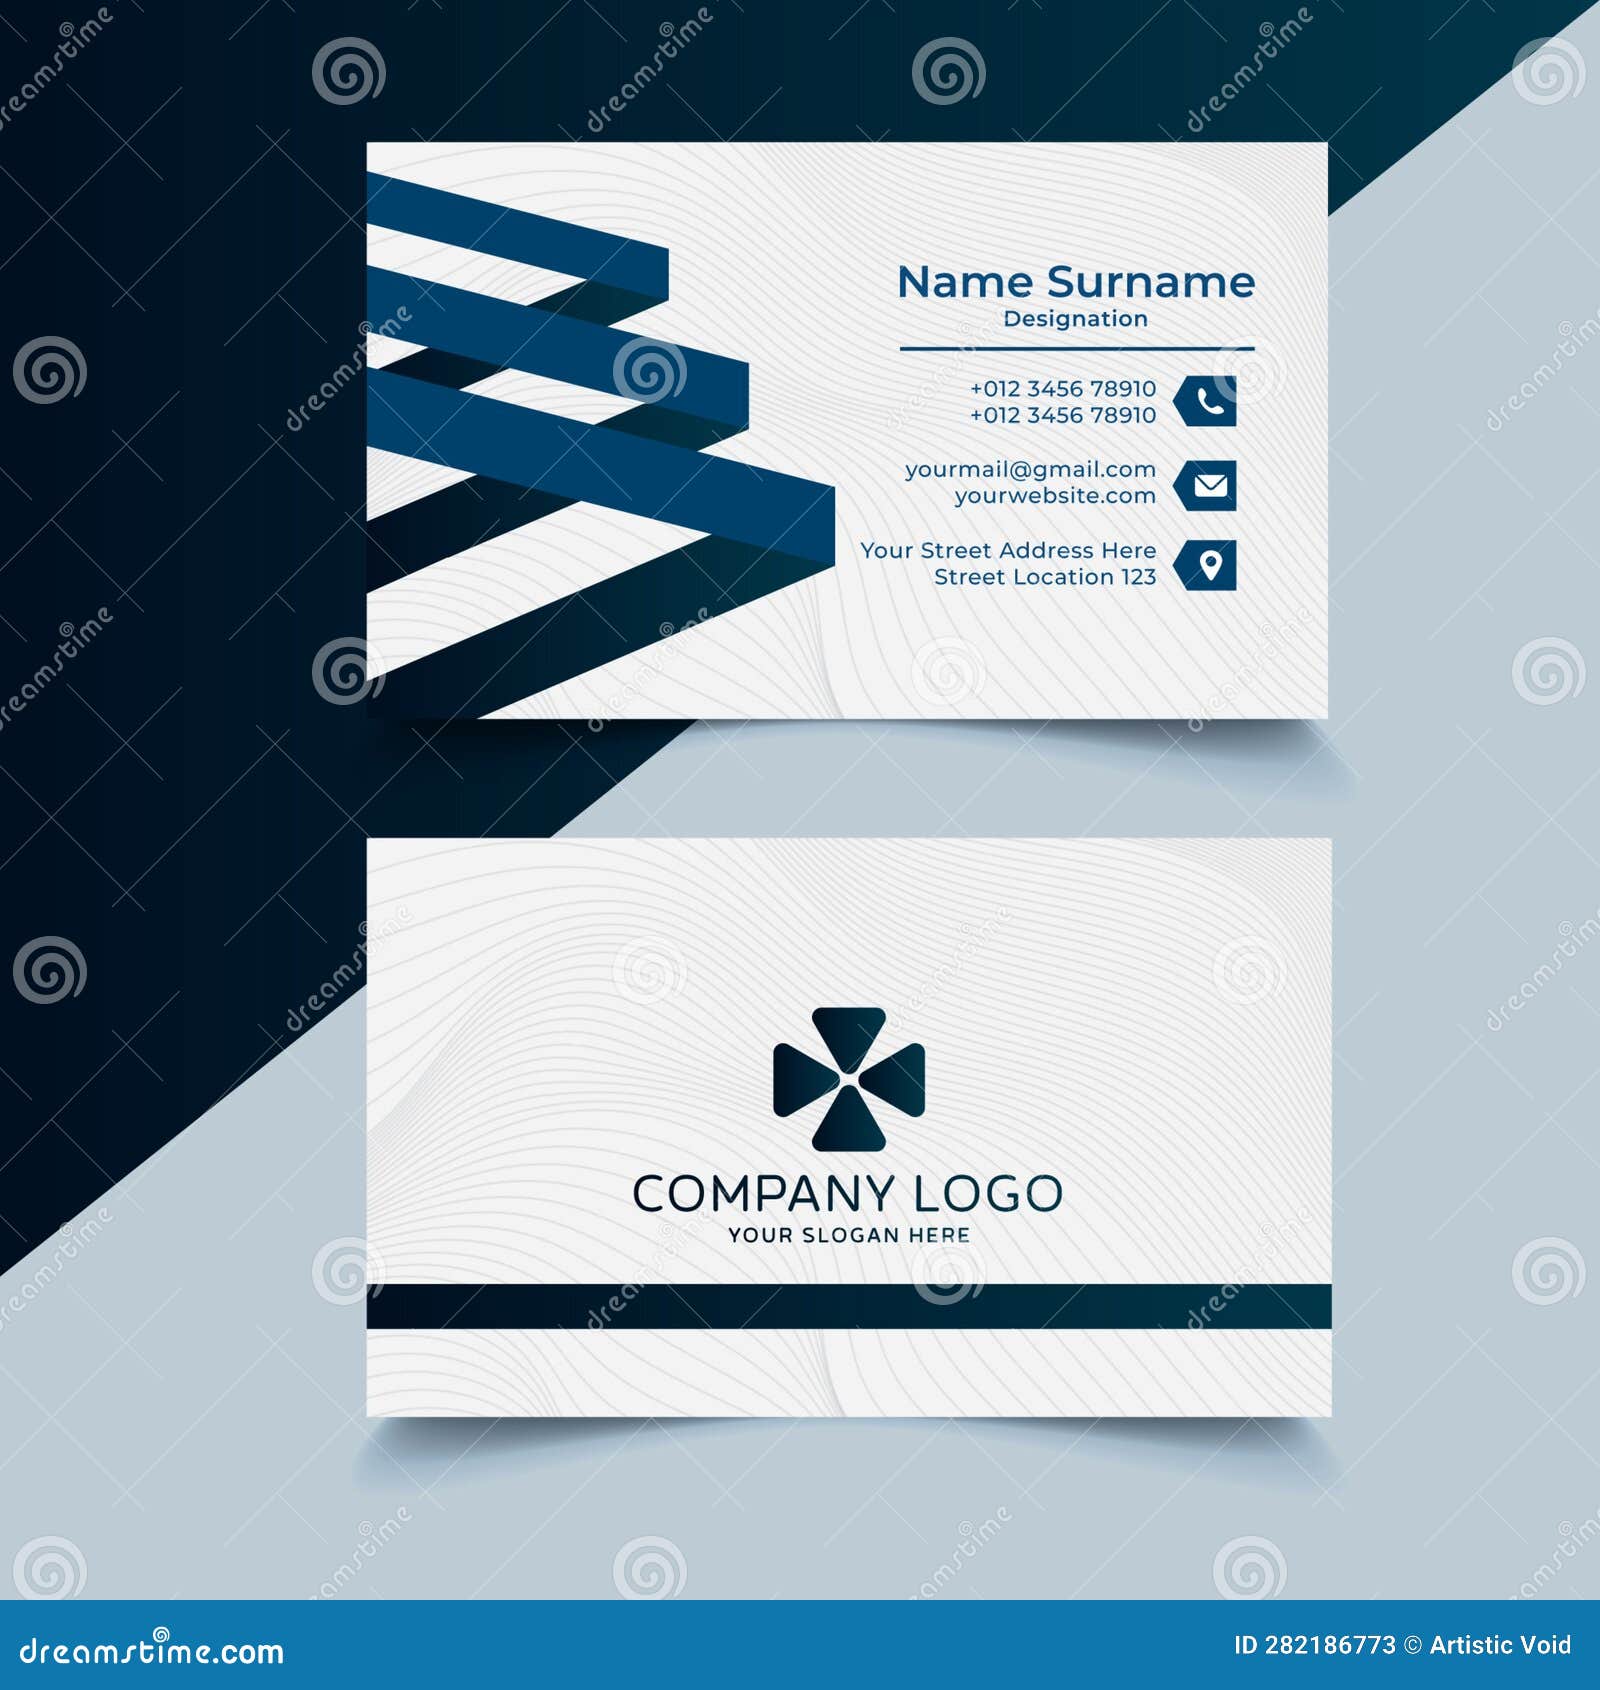 elegant template luxury business card. whtie background and navy blue abstract geometric s .